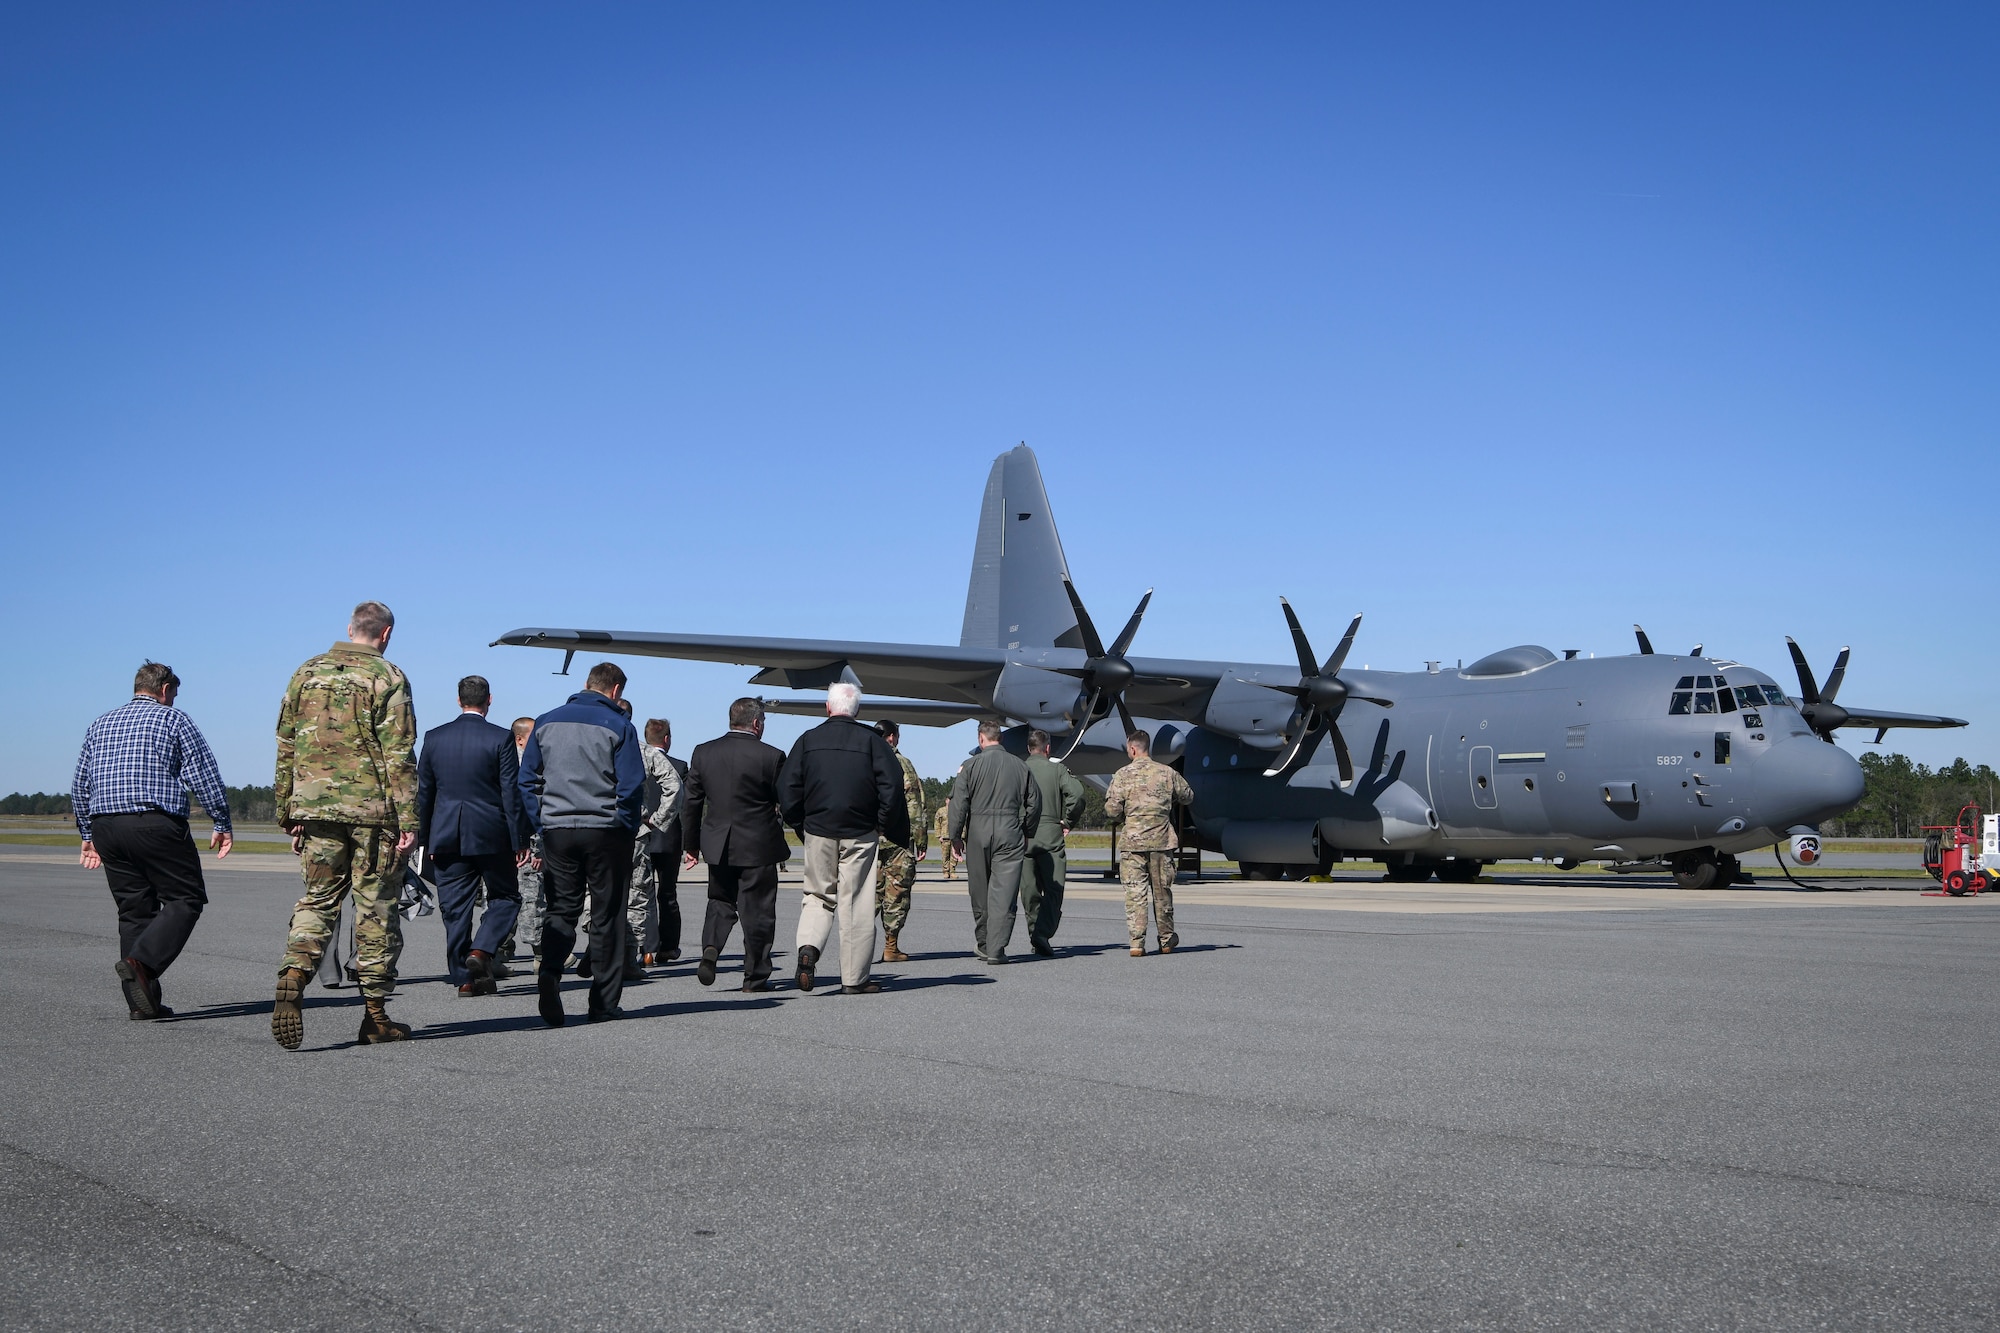 Airman and civilians walking out to aircraft